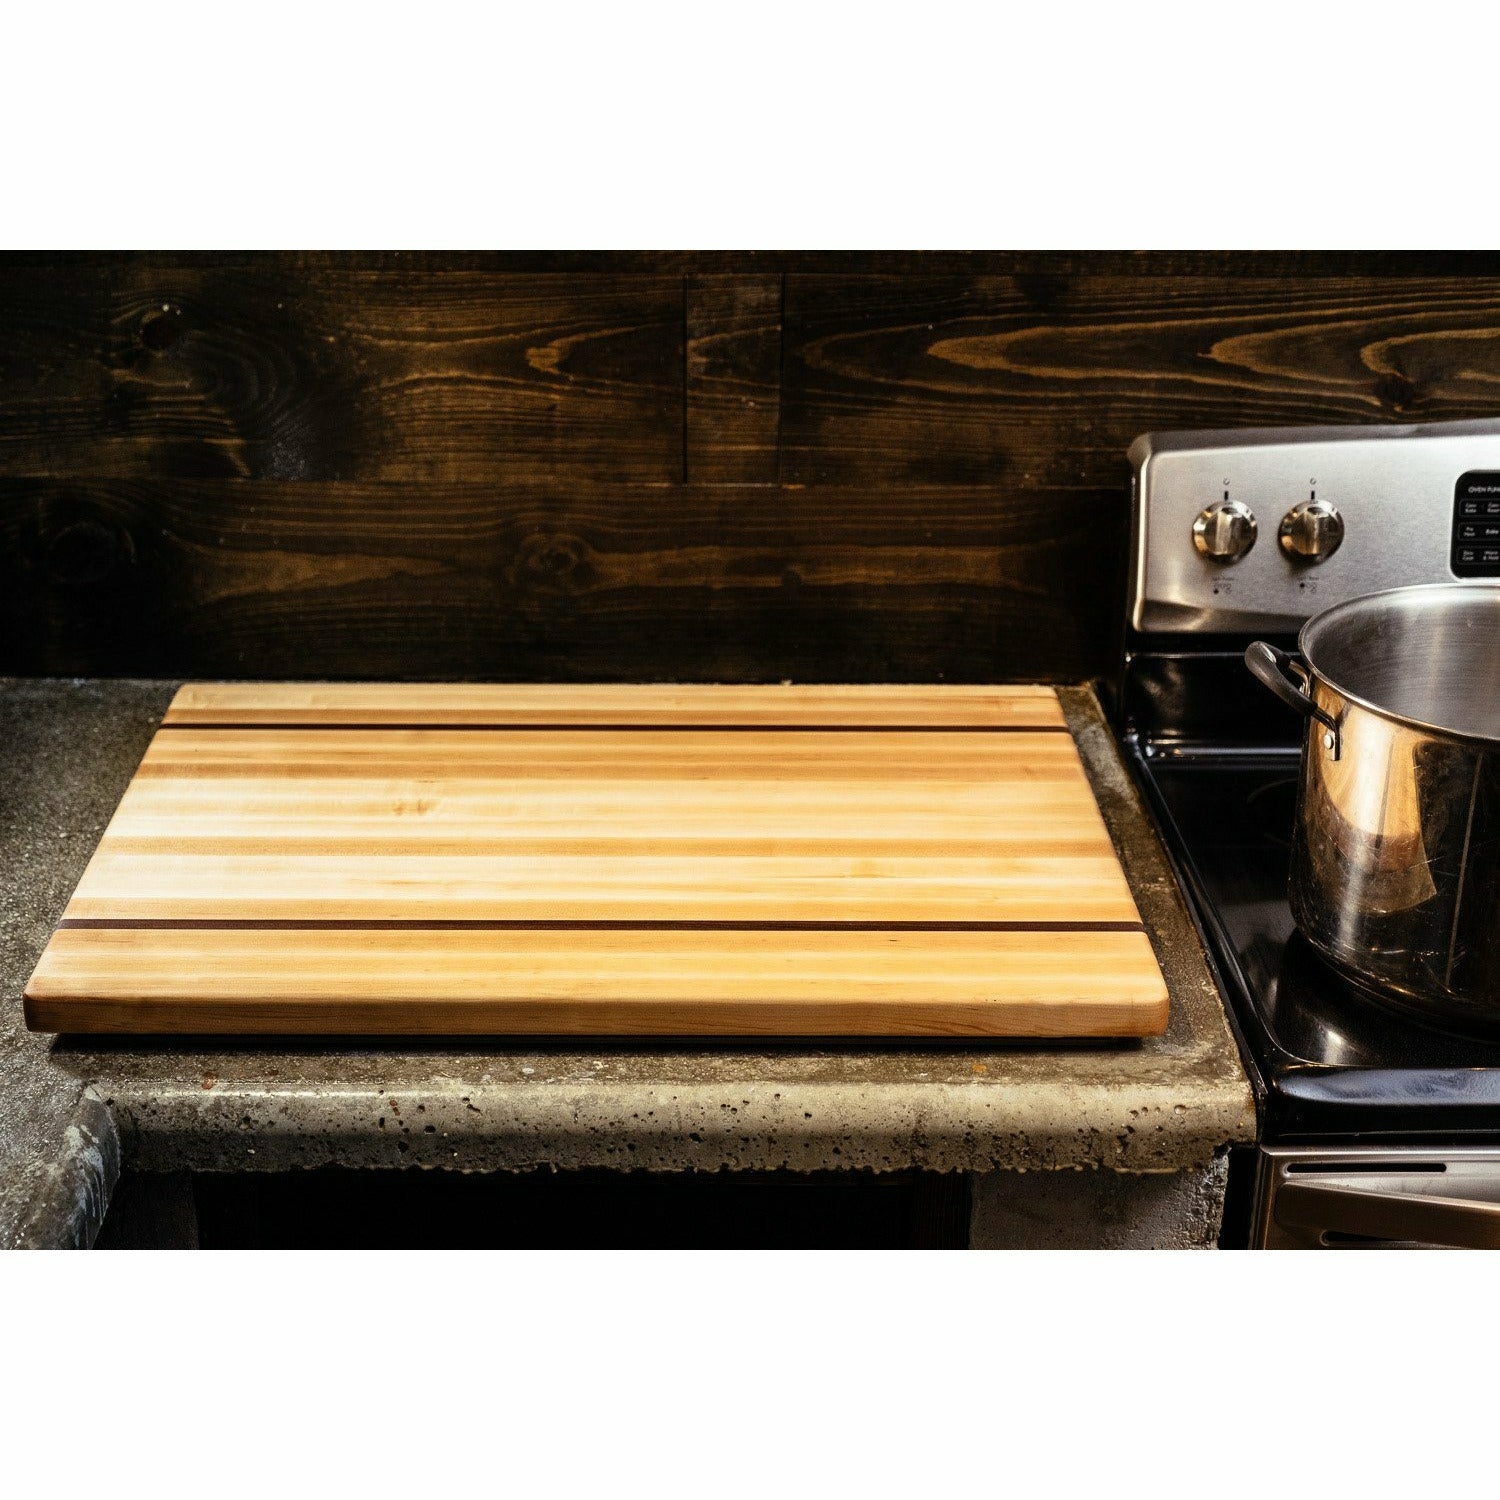  Extra Large Stove Top Cover for Gas Stove & Electric Stove,  Wooden Stovetop Cover Cutting Board for Counter Space, Stove Burner Covers,  Sink Cover, Stove Top Cover, 30 In Bamboo